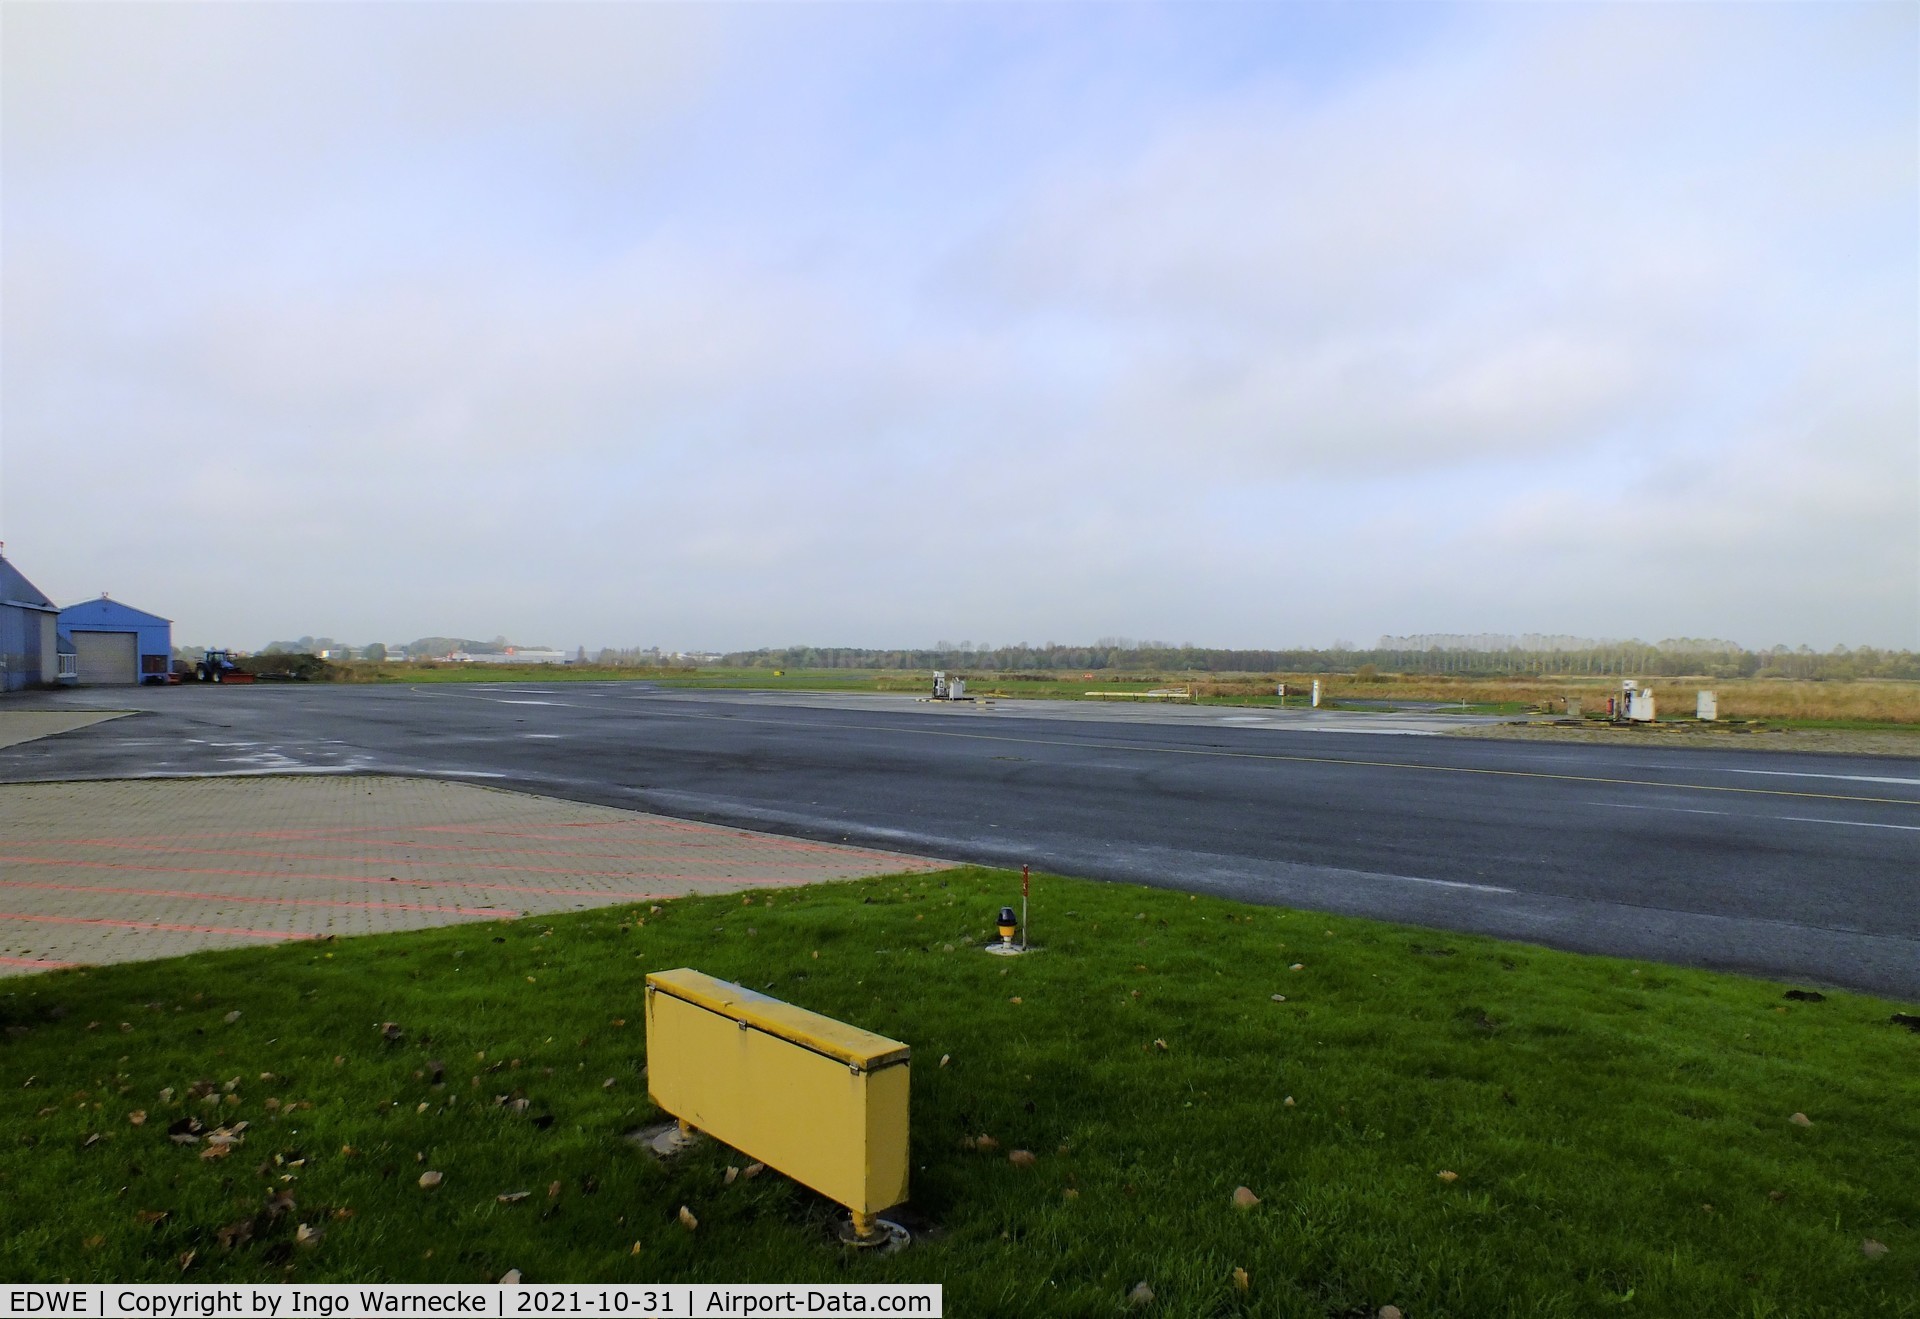 EDWE Airport - apron and taxiway west of the tower at Emden airfield